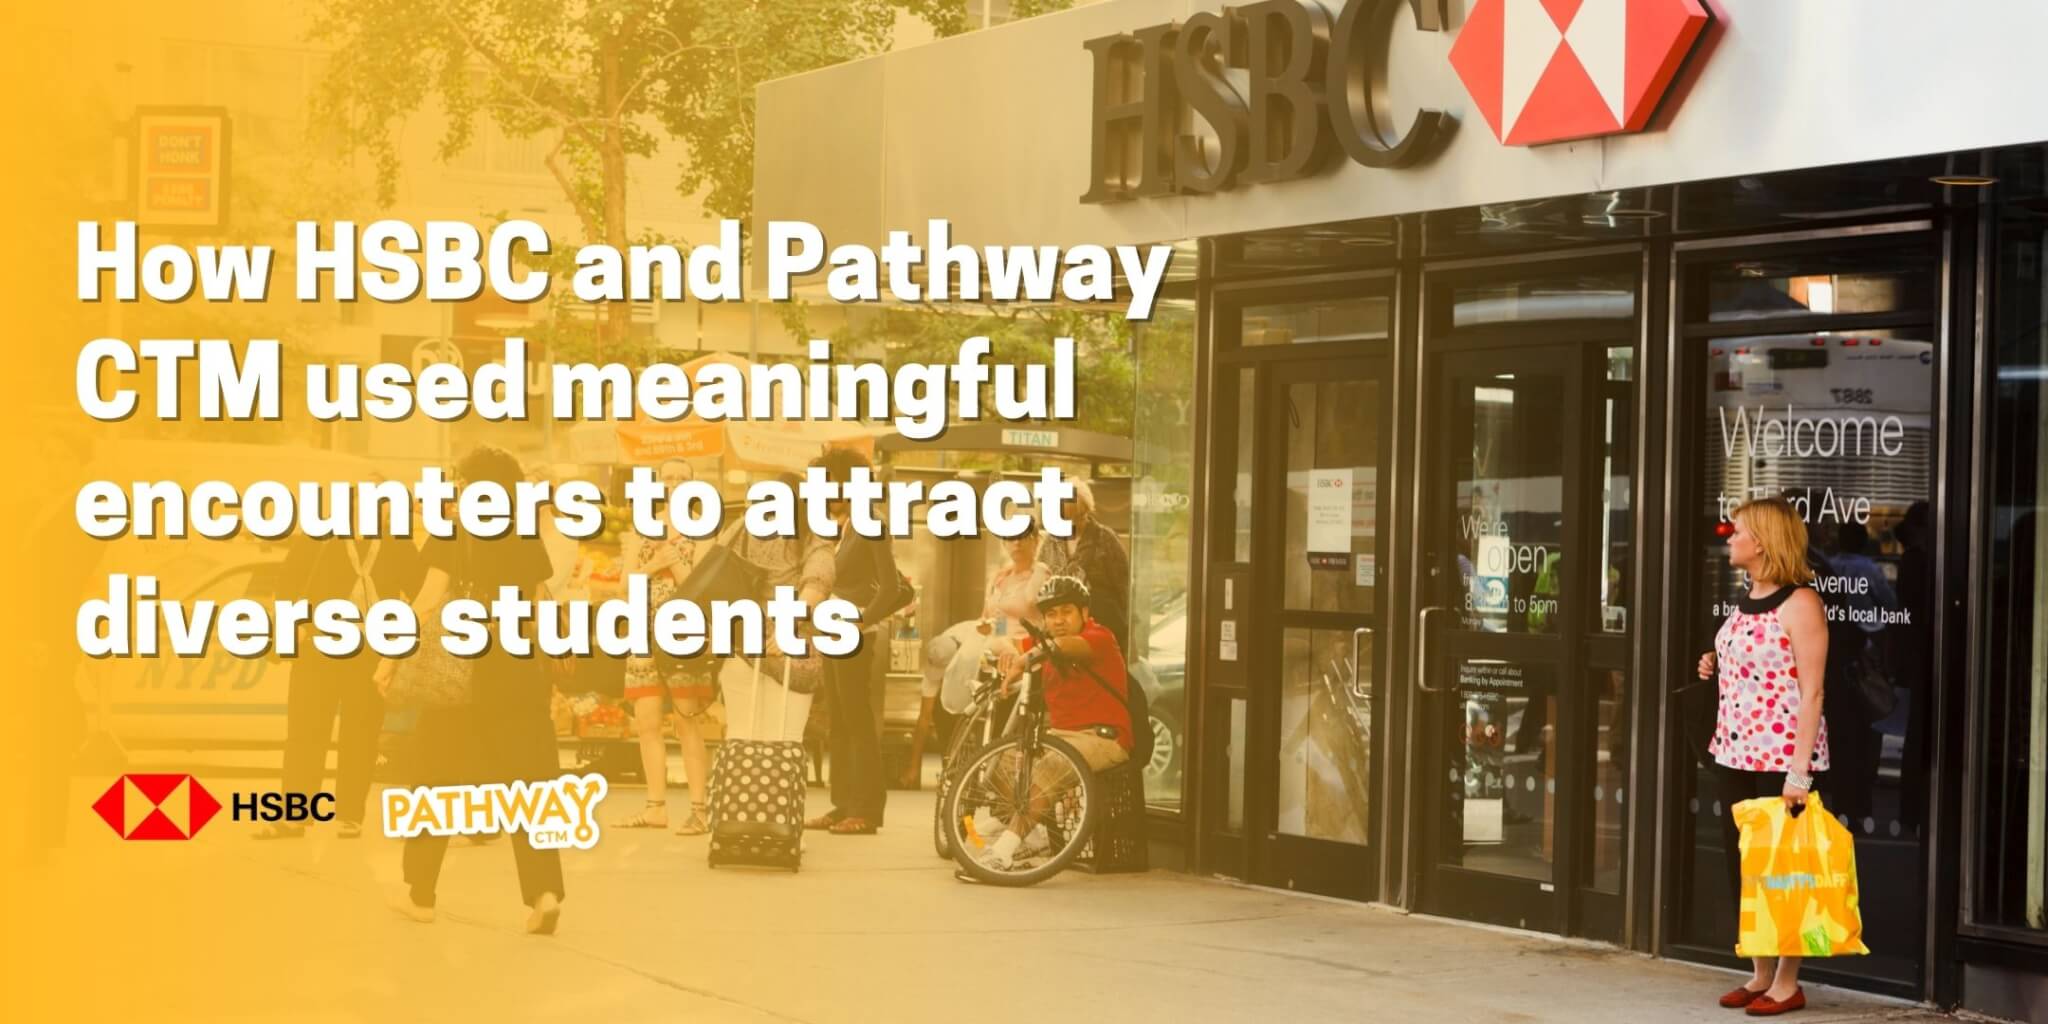 How HSBC and Pathway CTM used meaningful encounters to attract diverse students